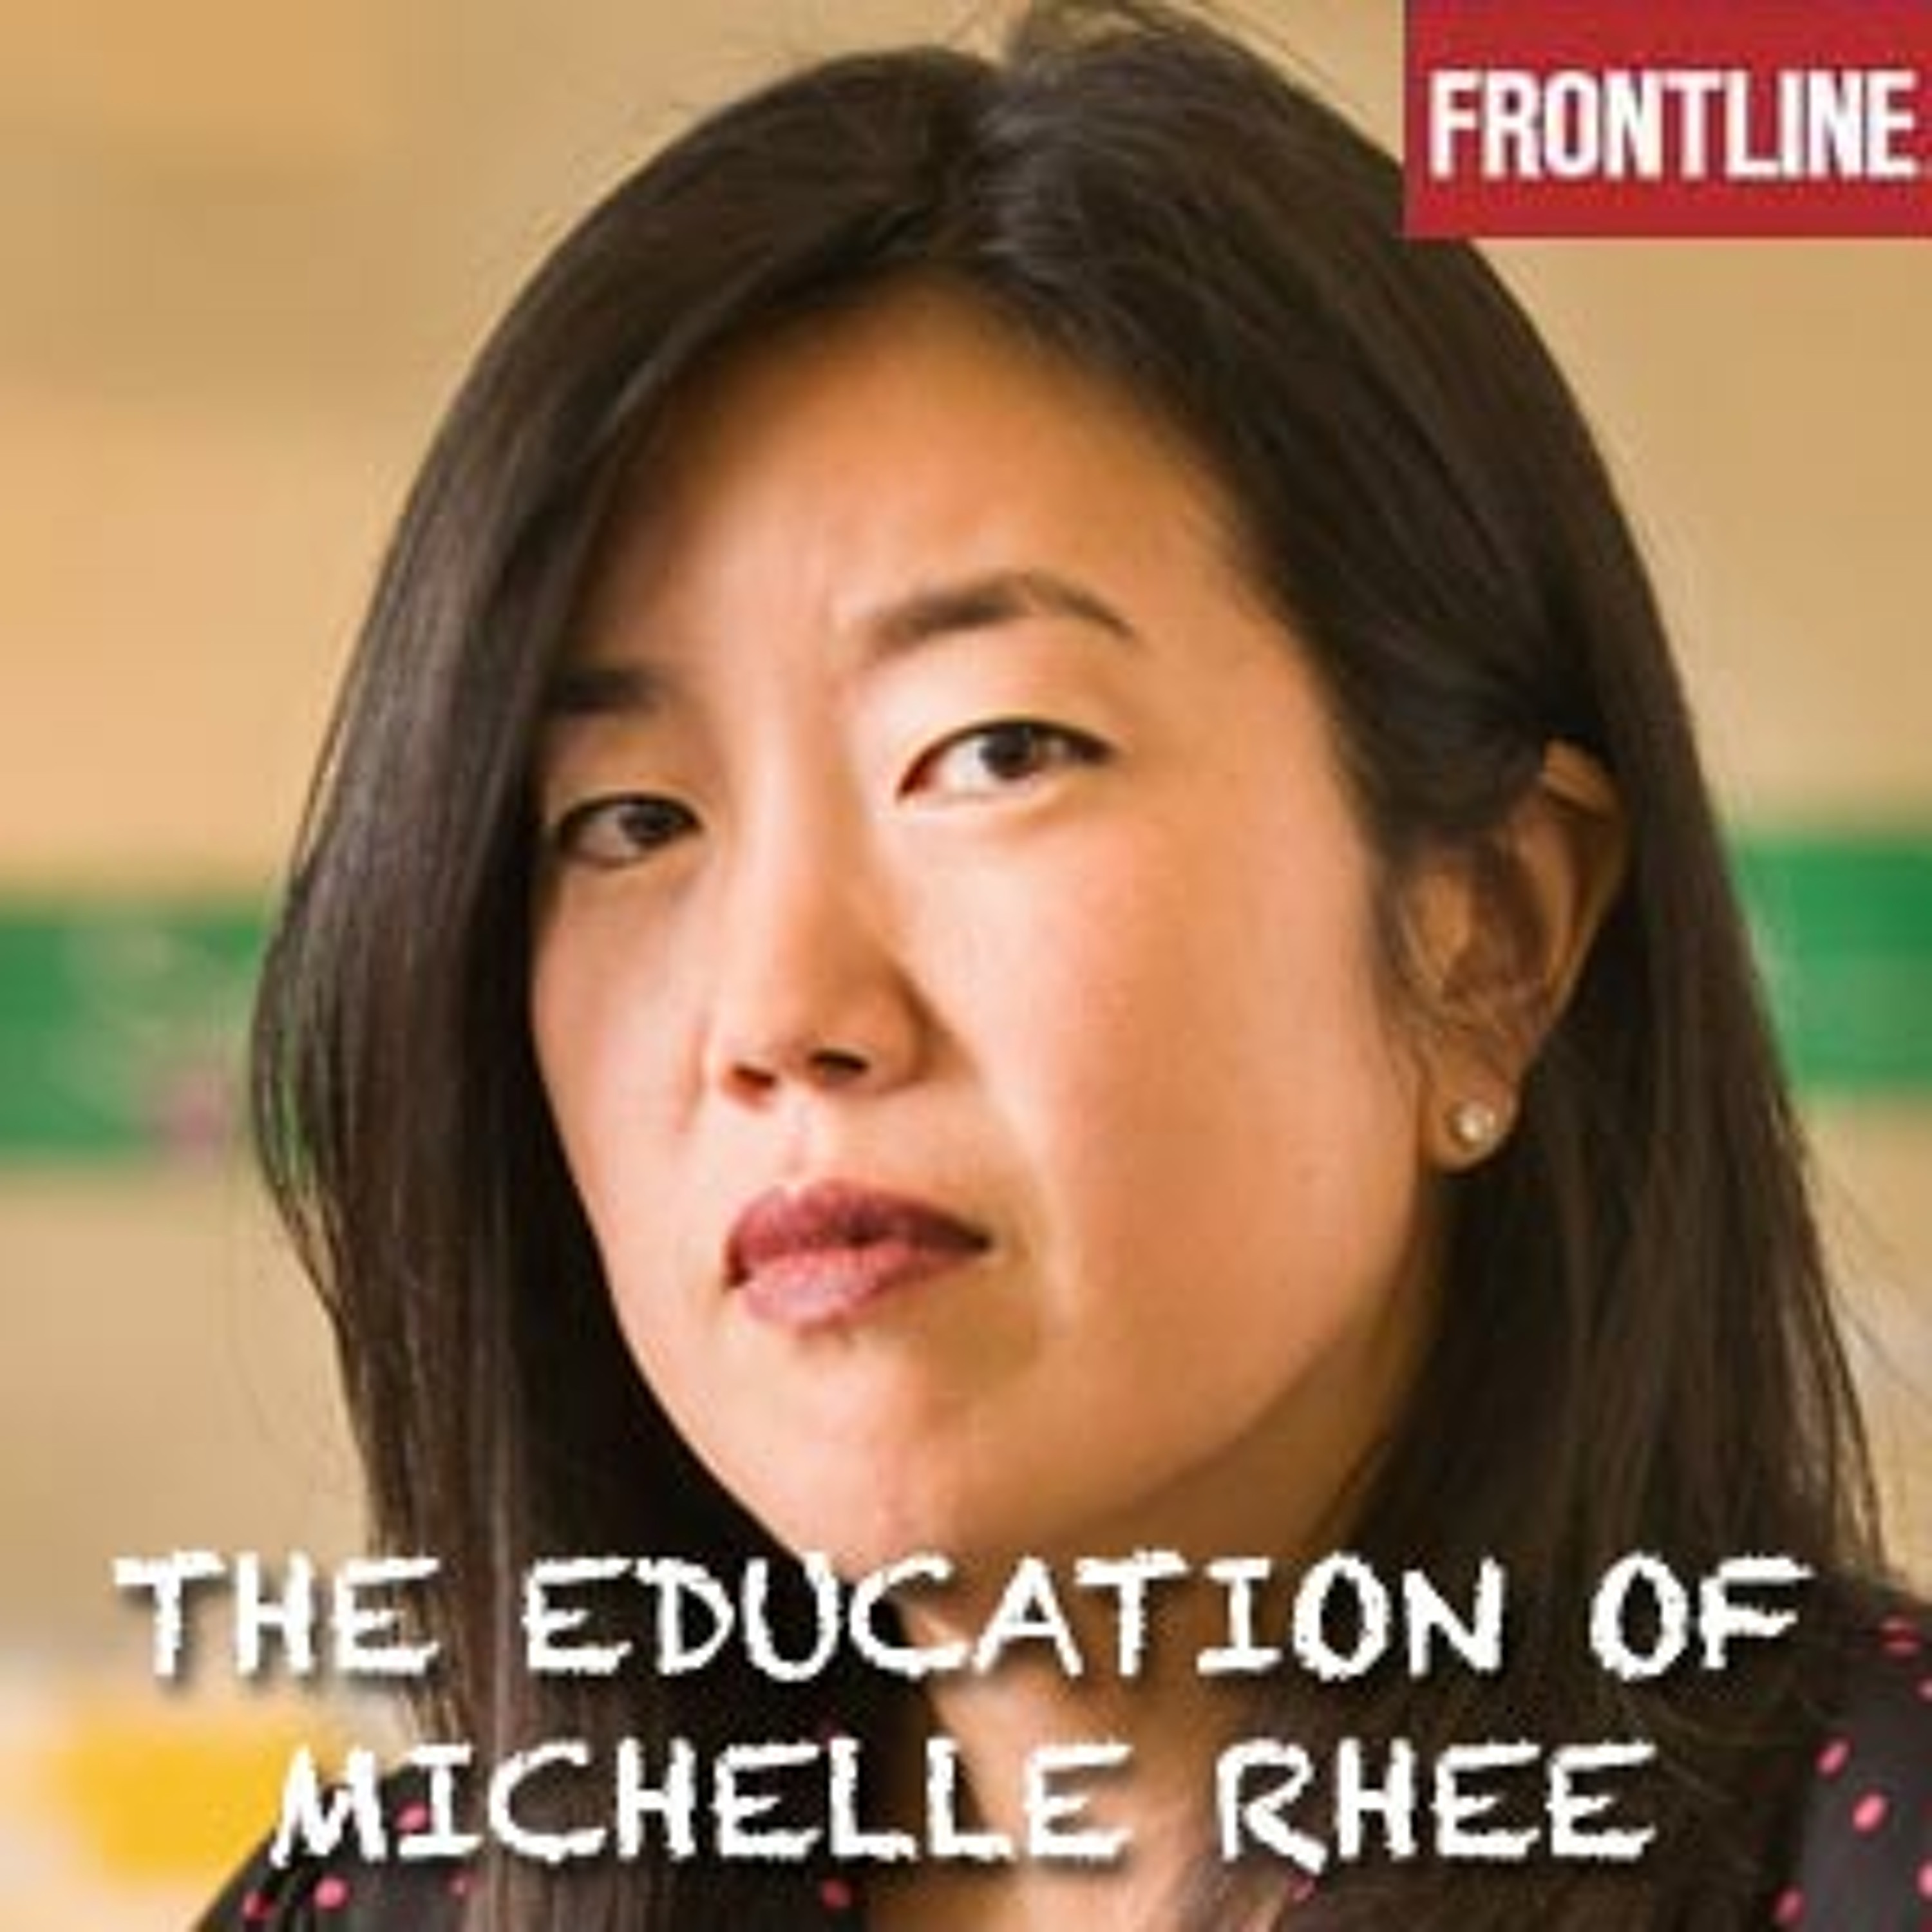 The Education of Michelle Rhee